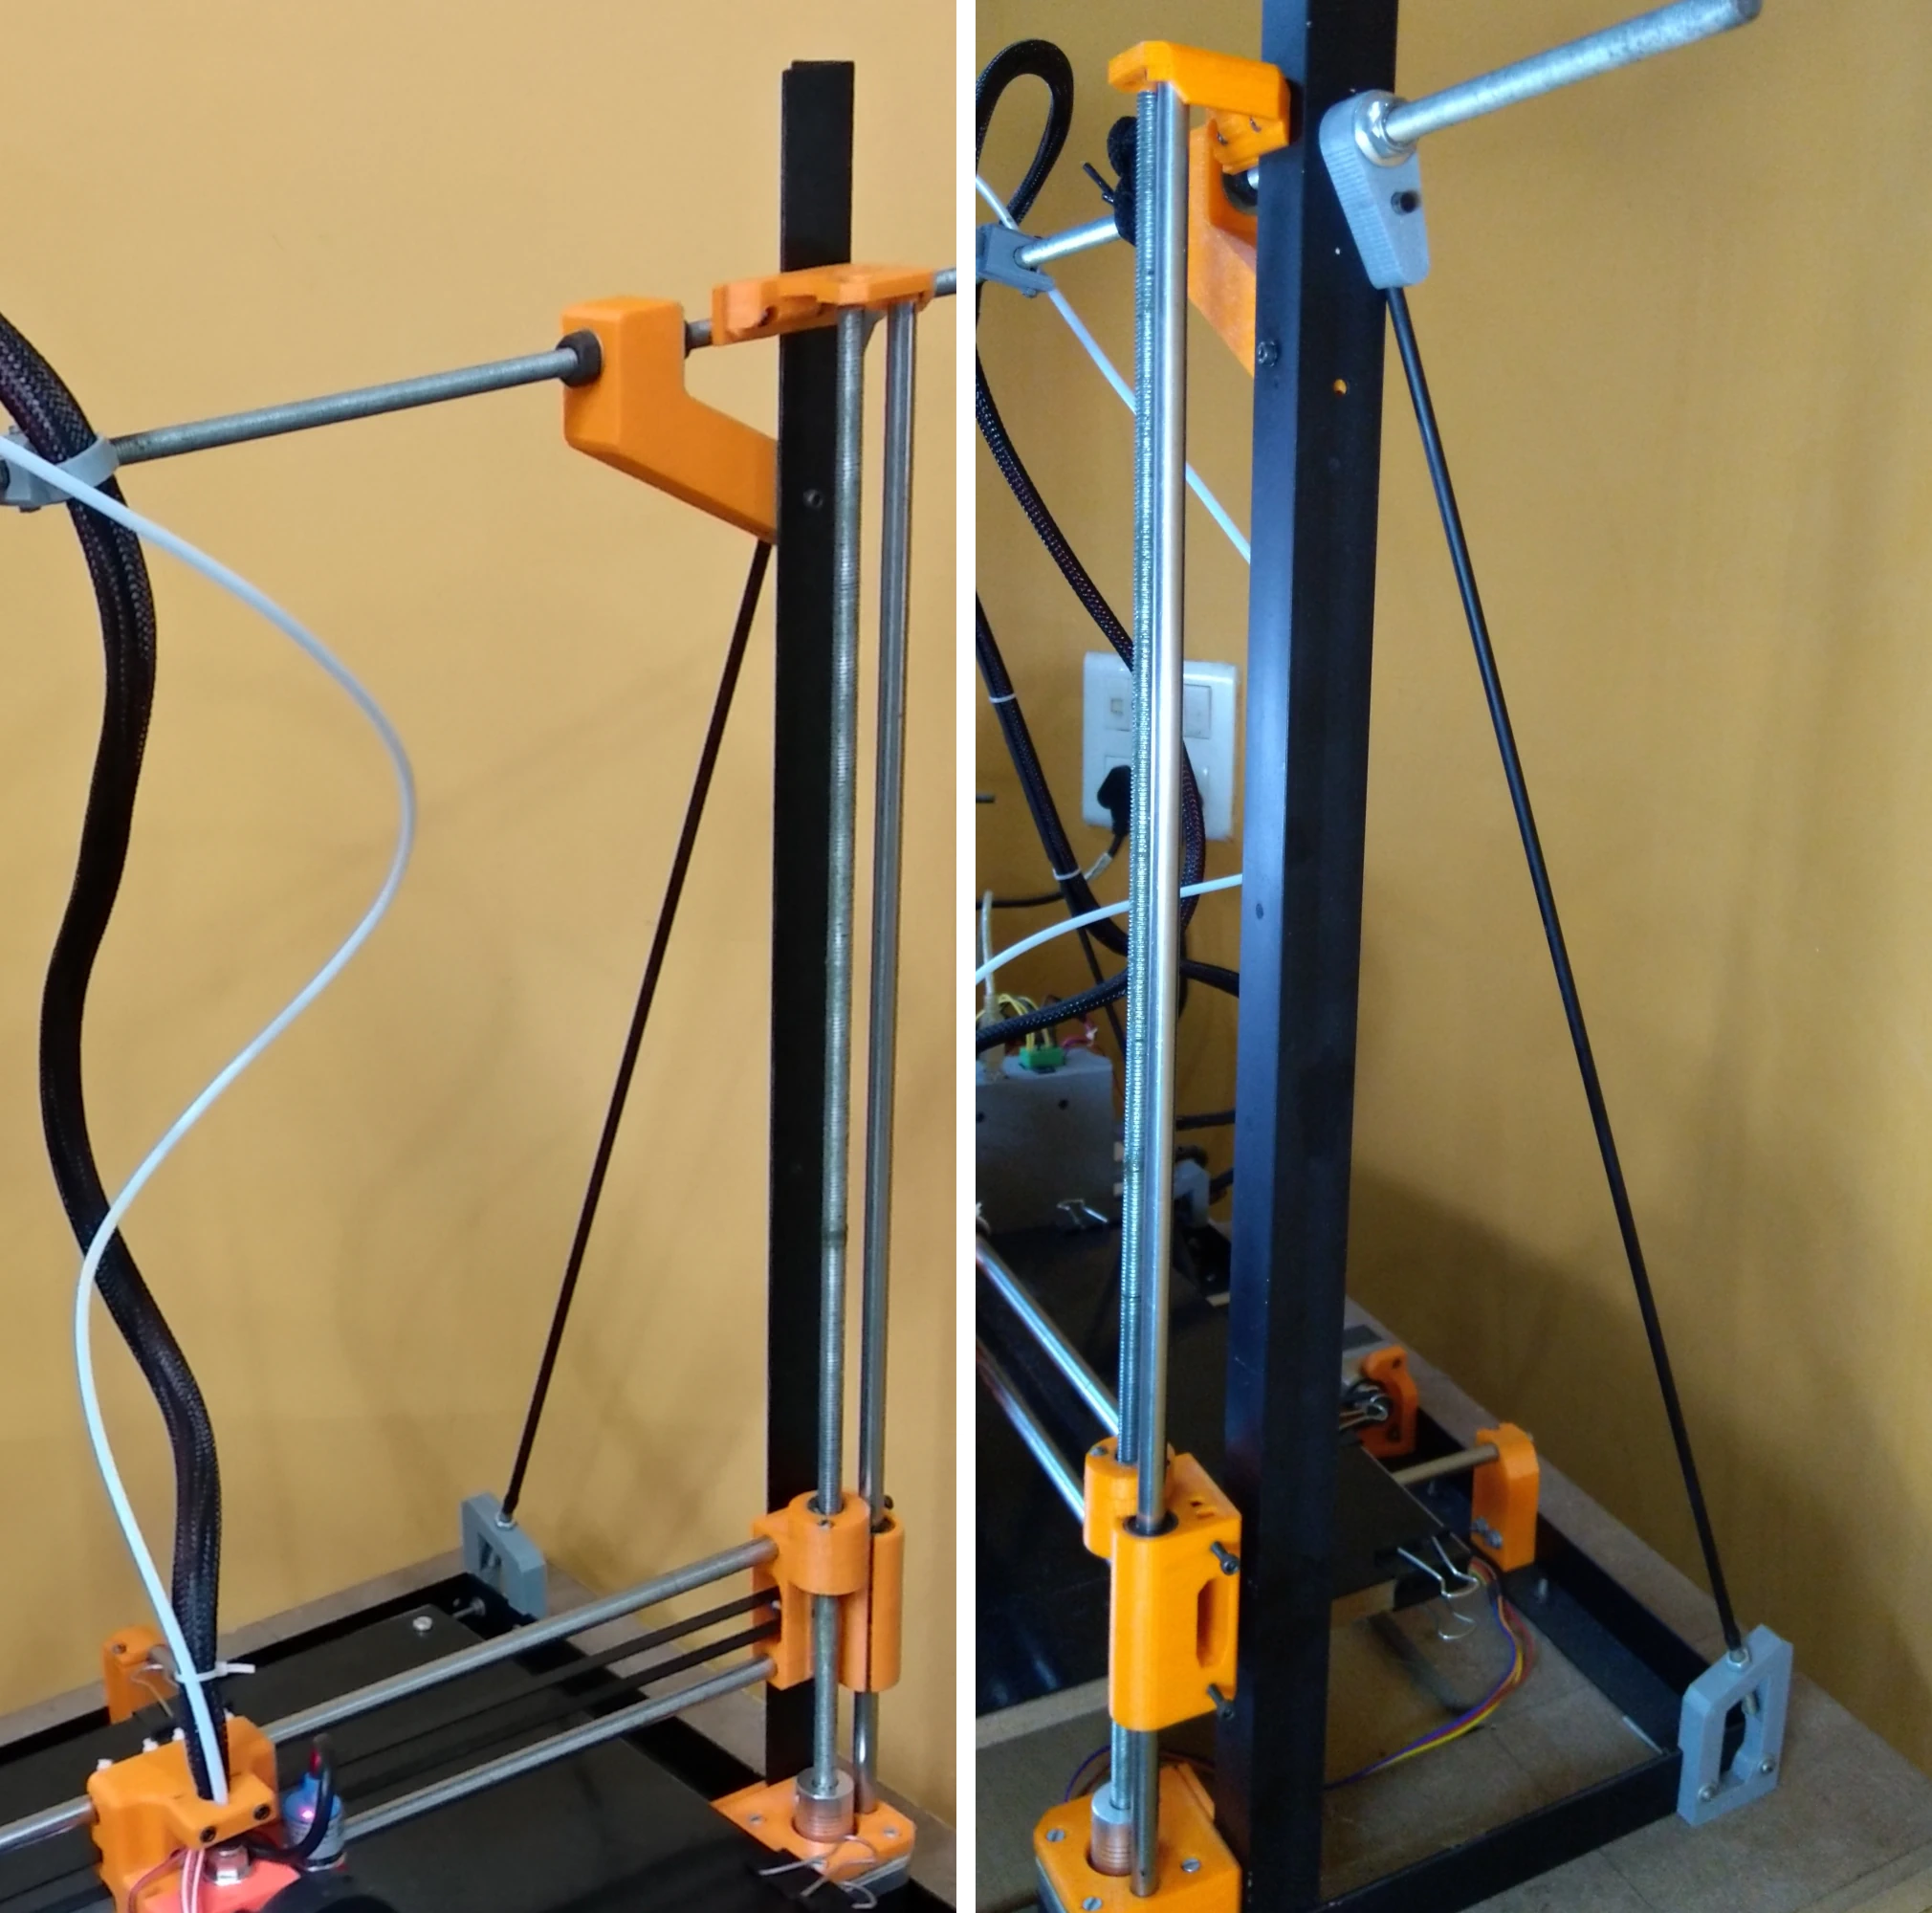 Z axis beam and side support